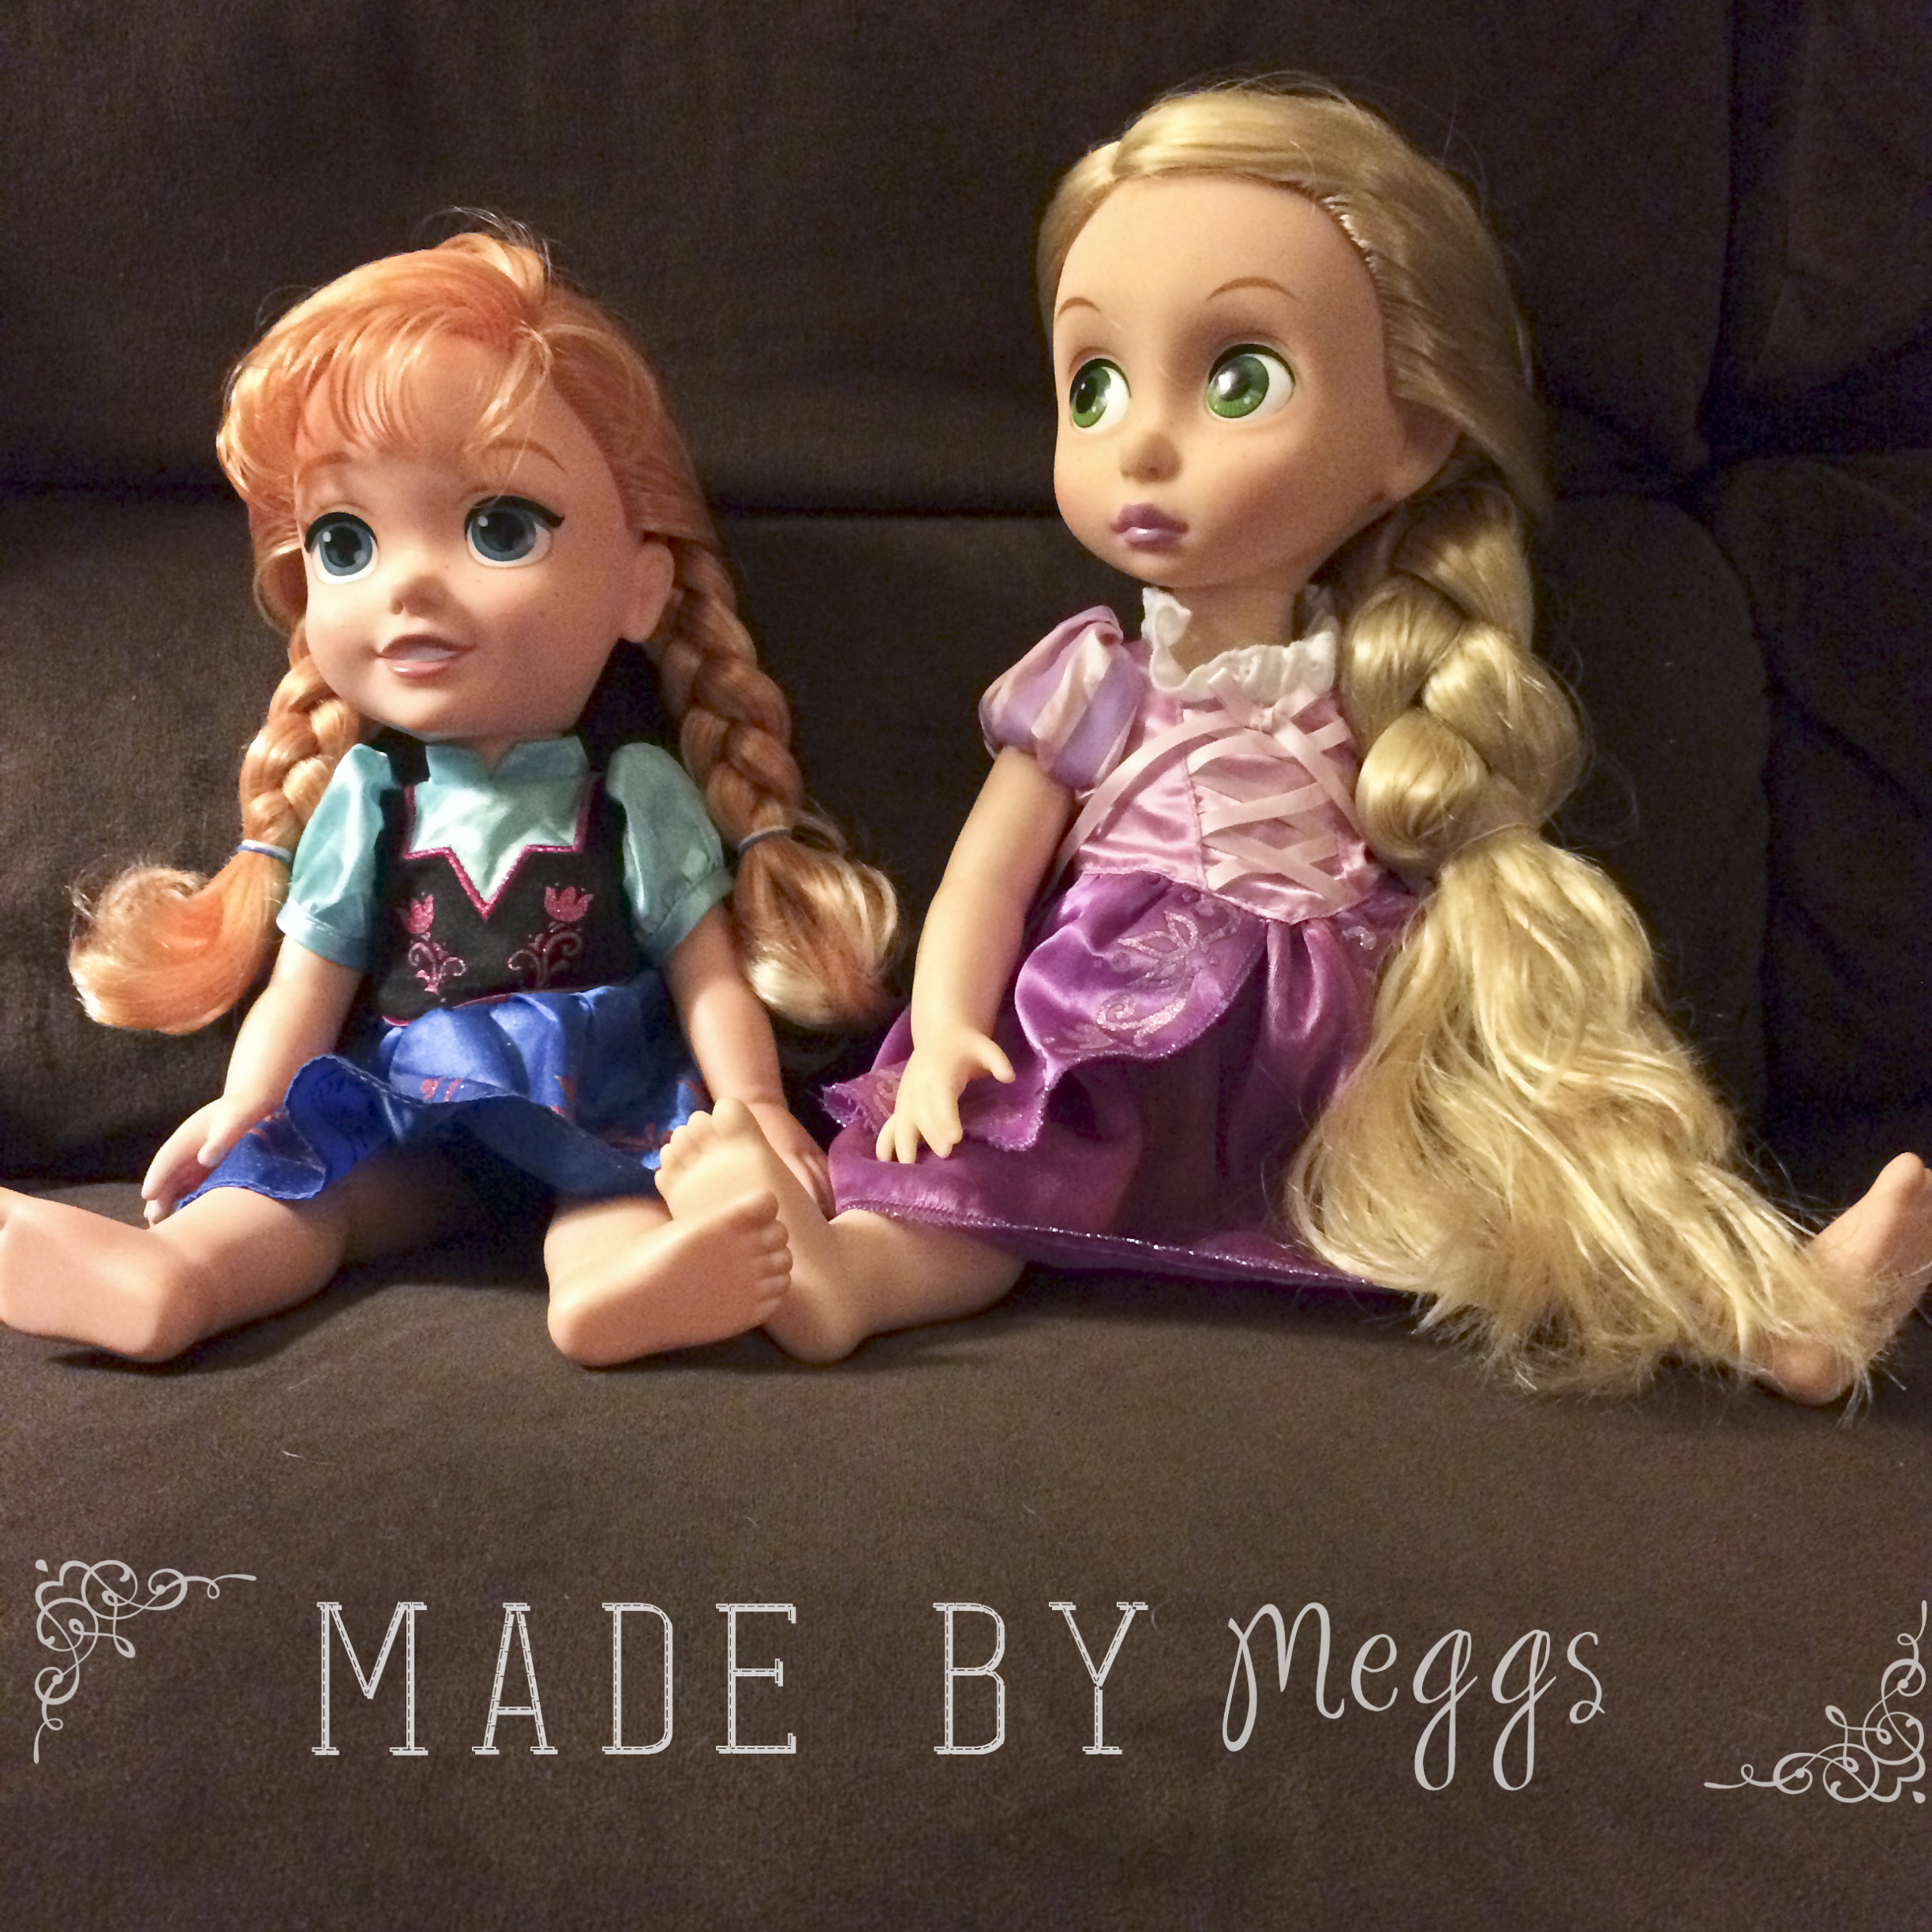 DIY Quick Fix For Tangled Doll Hair Made By Meggs